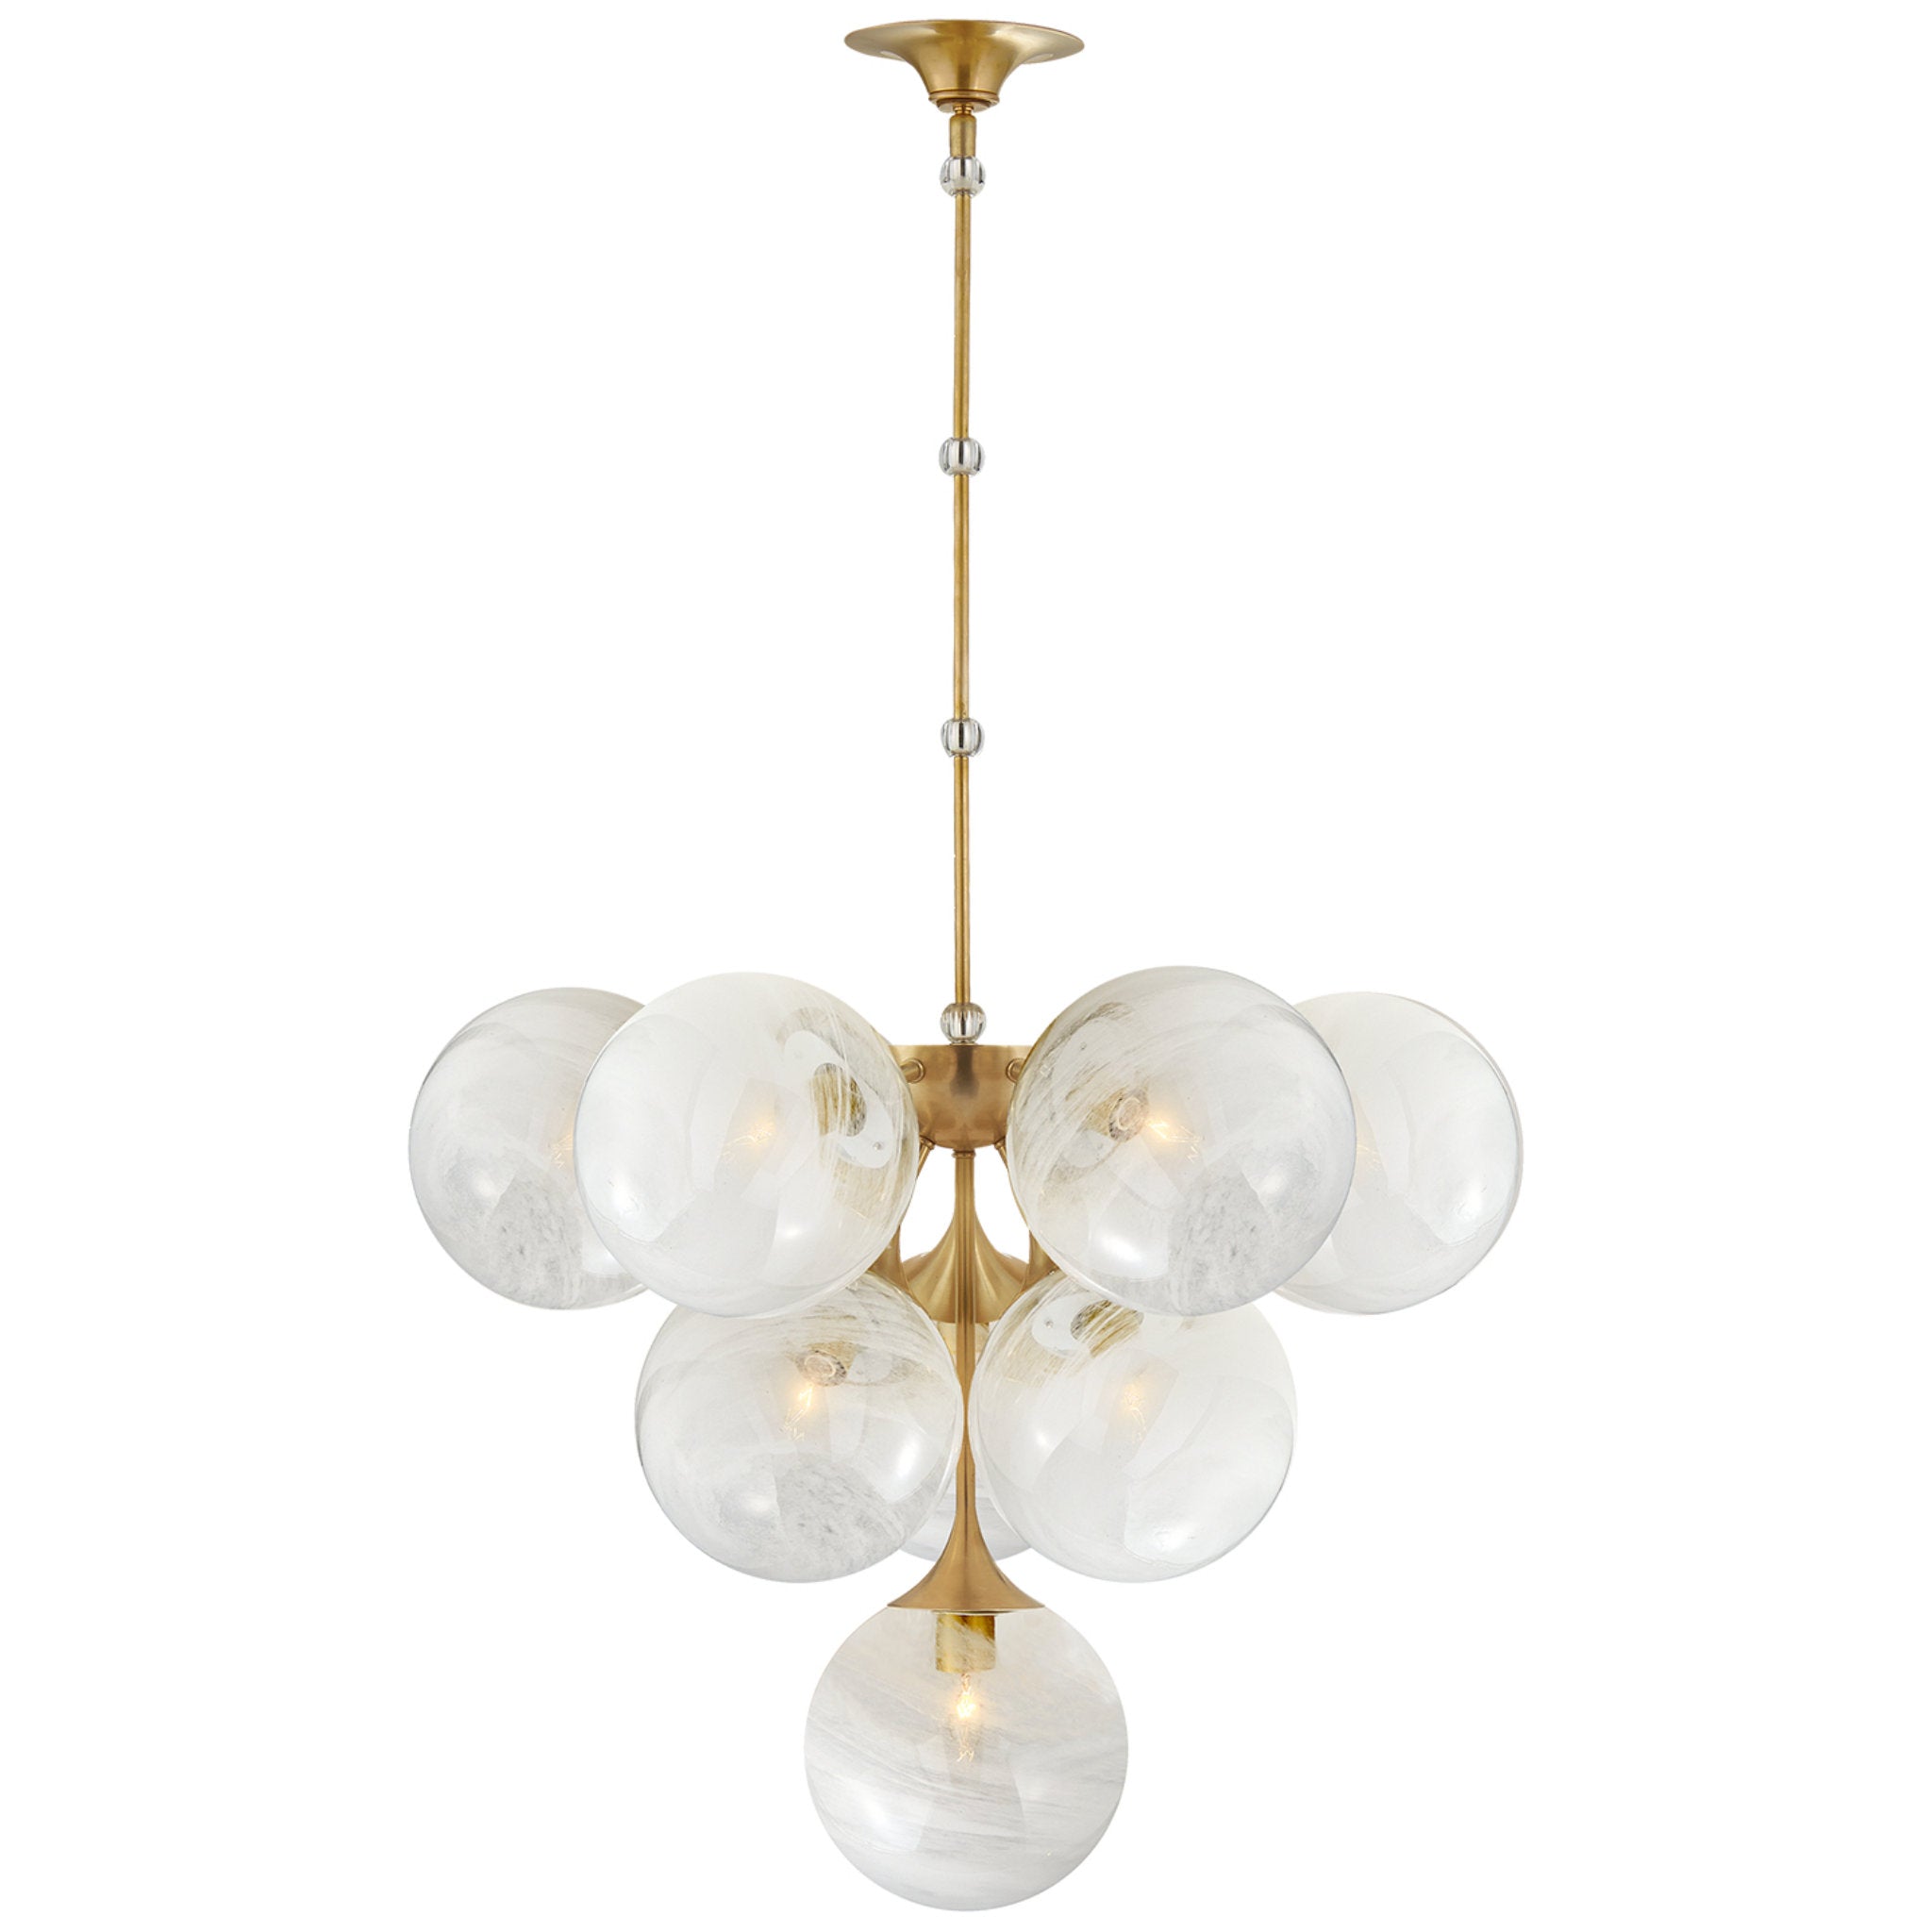 AERIN Cristol Tiered Chandelier in Hand-Rubbed Antique Brass with White Strie Glass